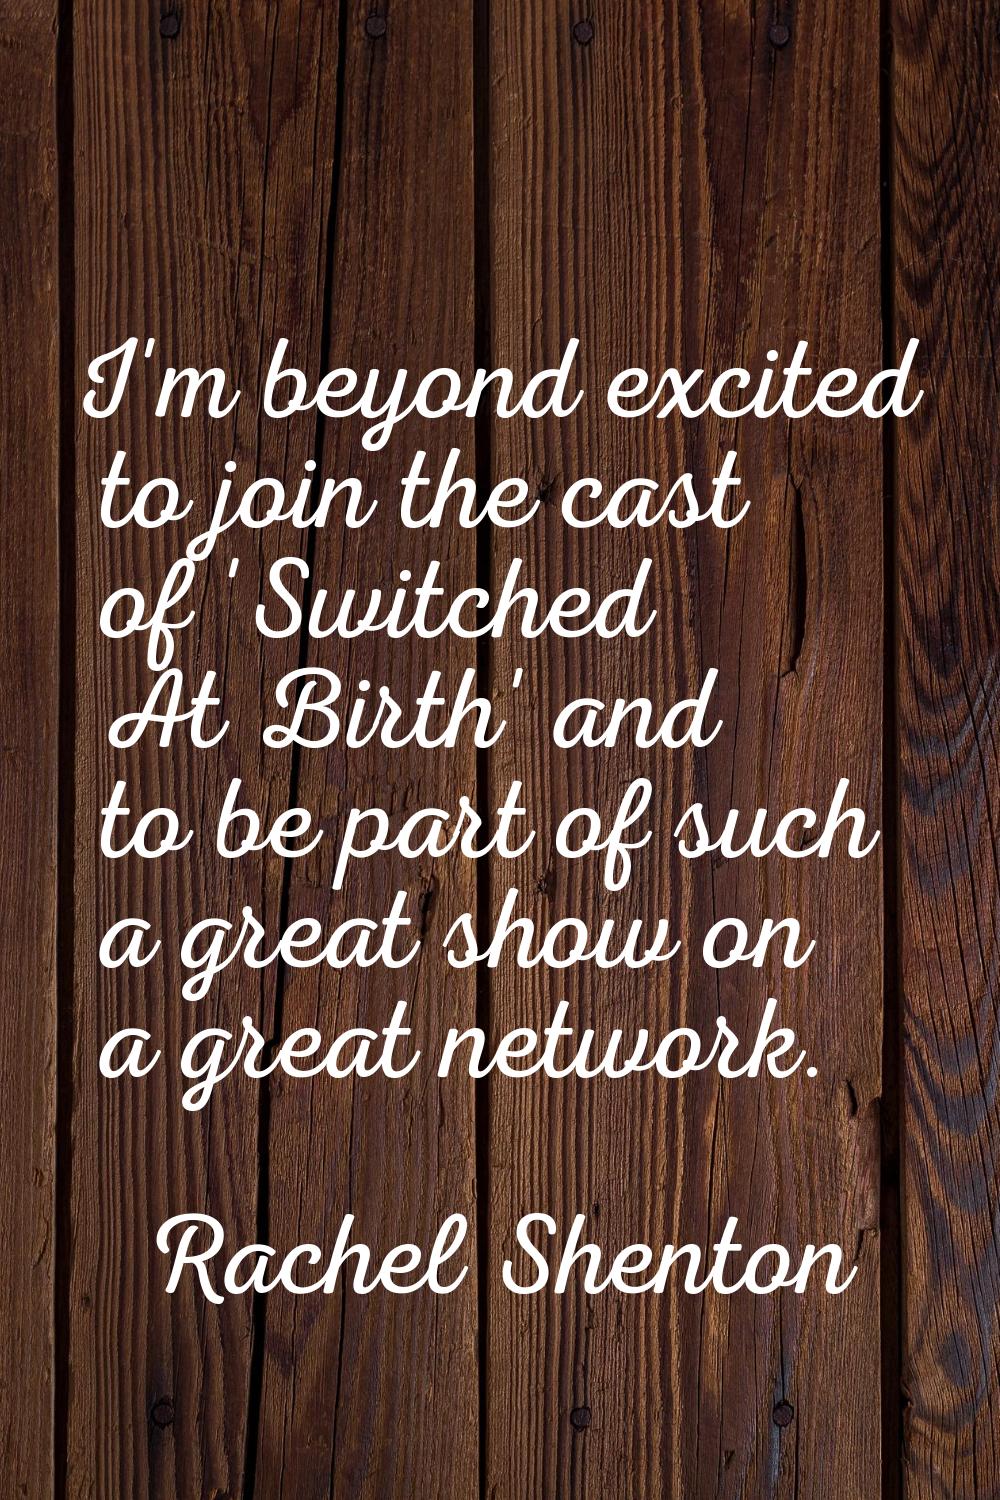 I'm beyond excited to join the cast of 'Switched At Birth' and to be part of such a great show on a